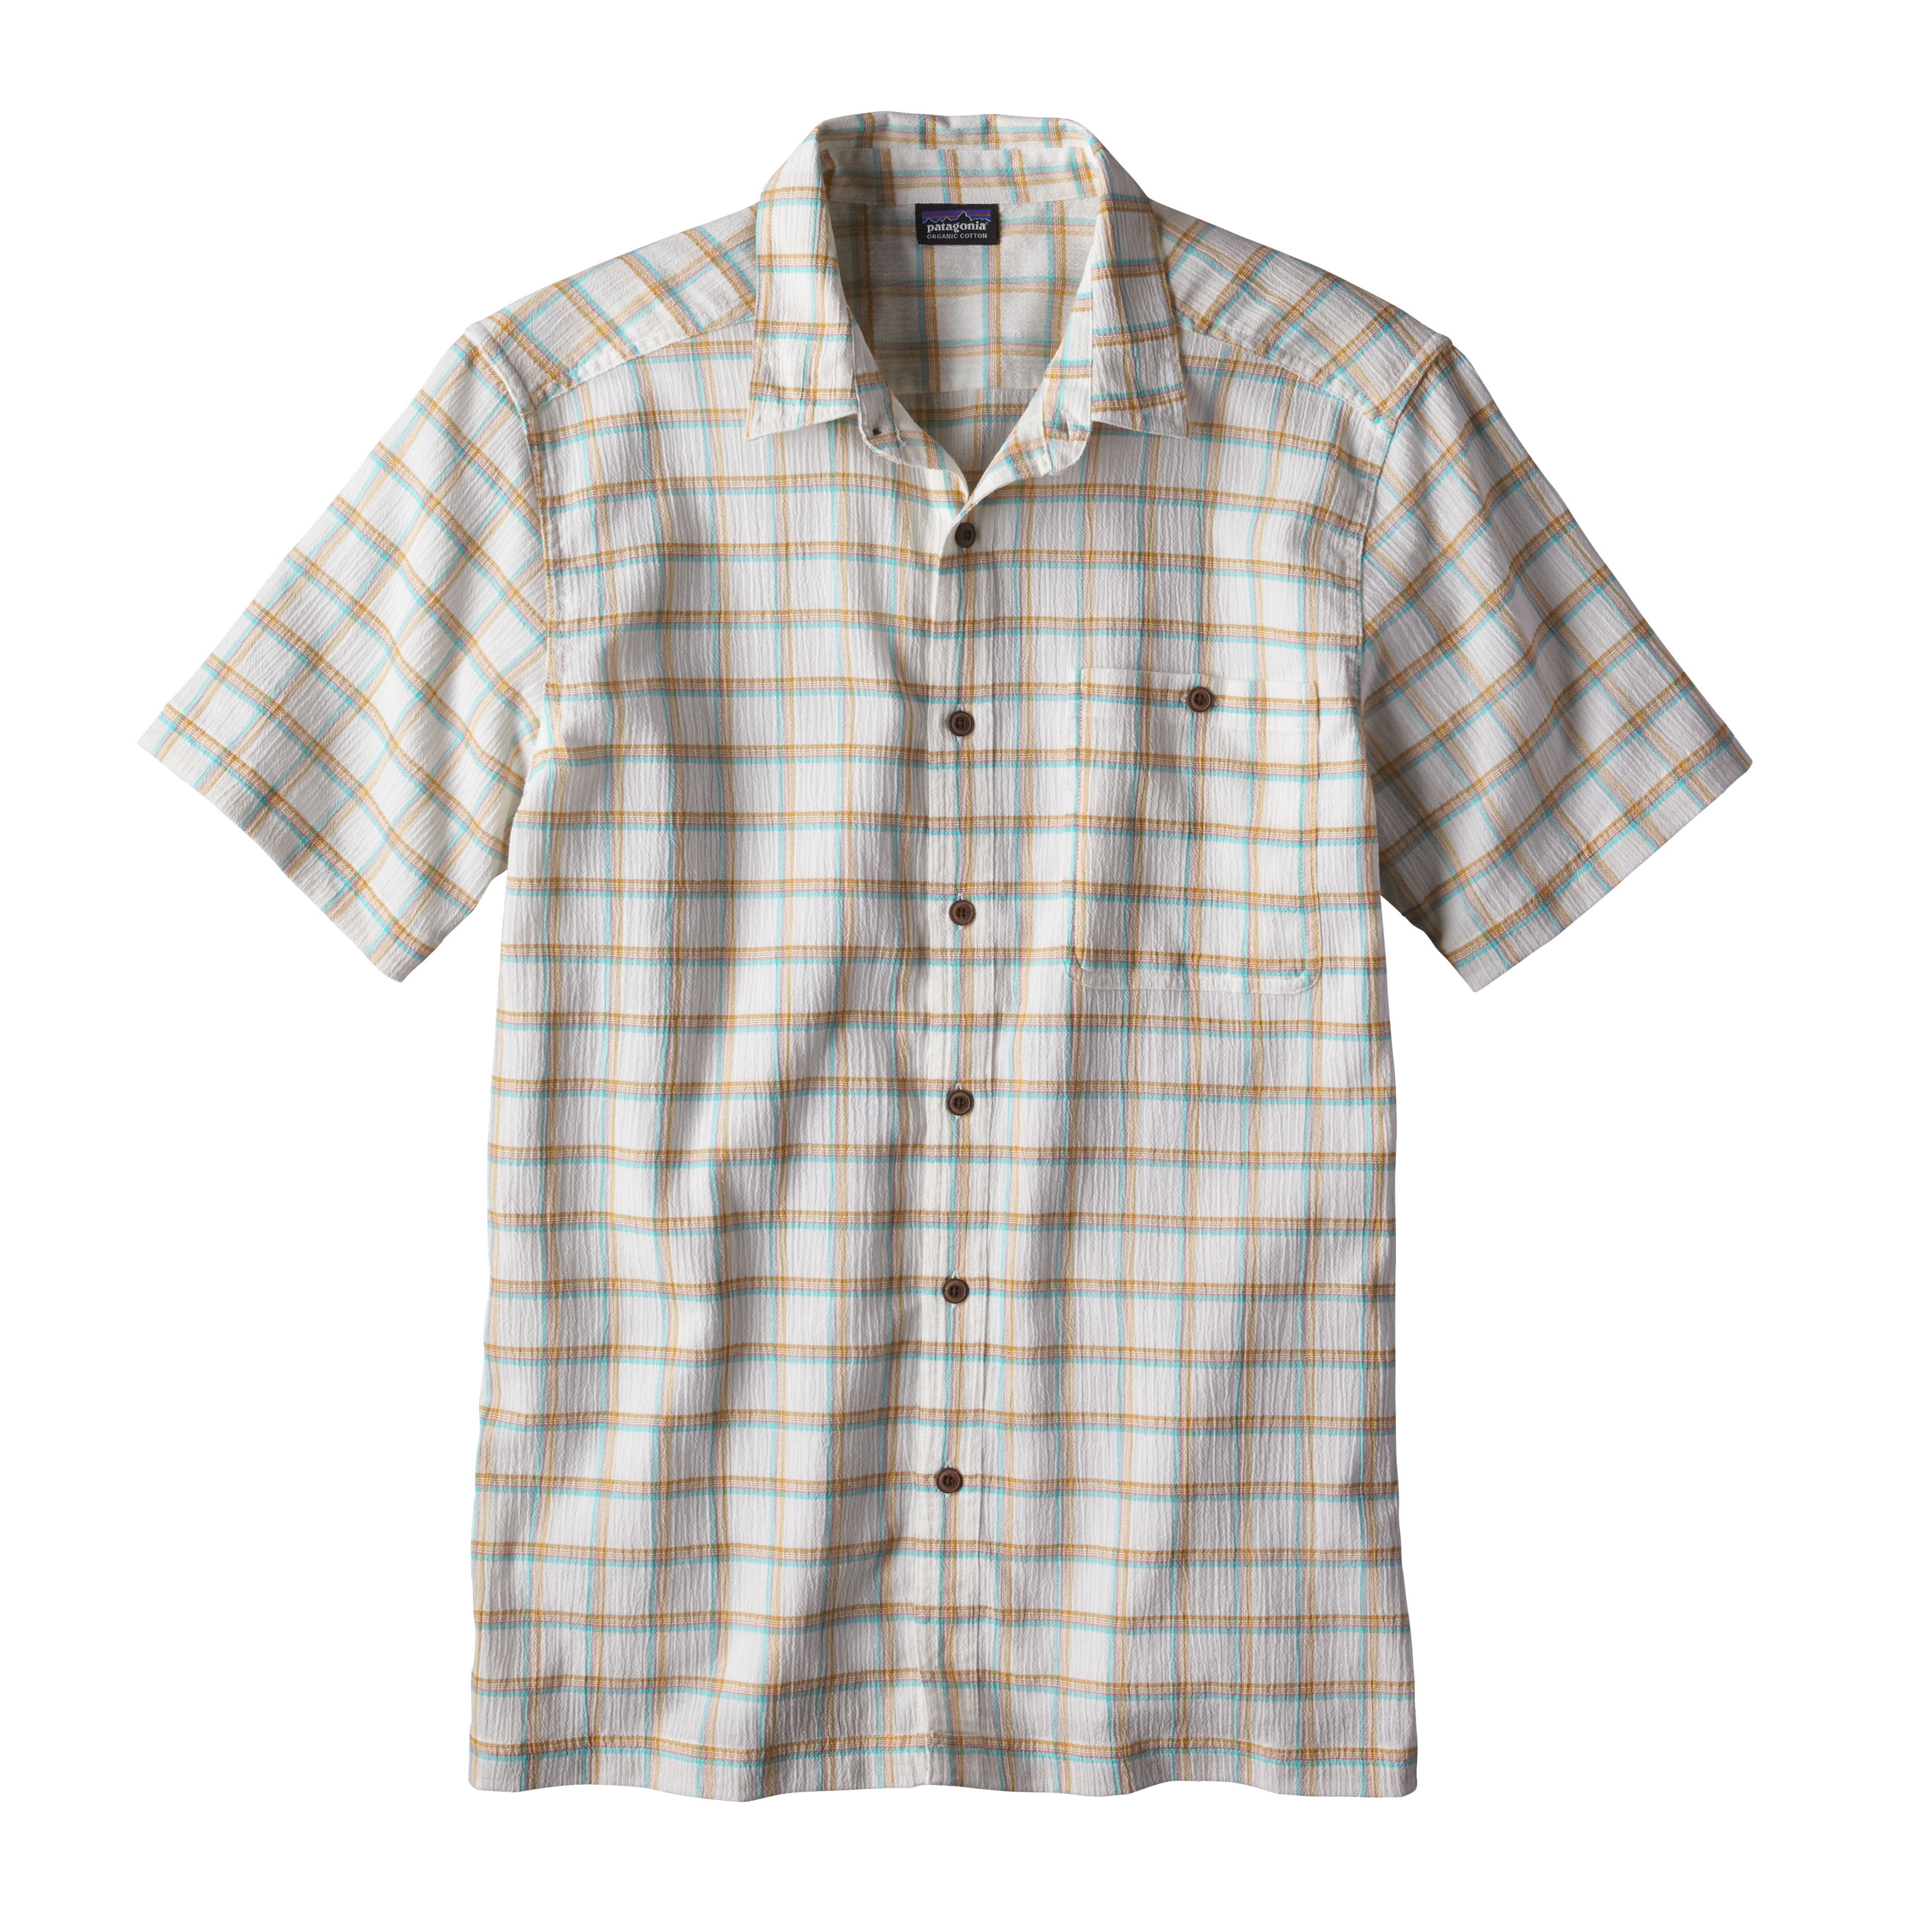 Patagonia A/C Shirt pas cher - Chemisette homme | Hardloop